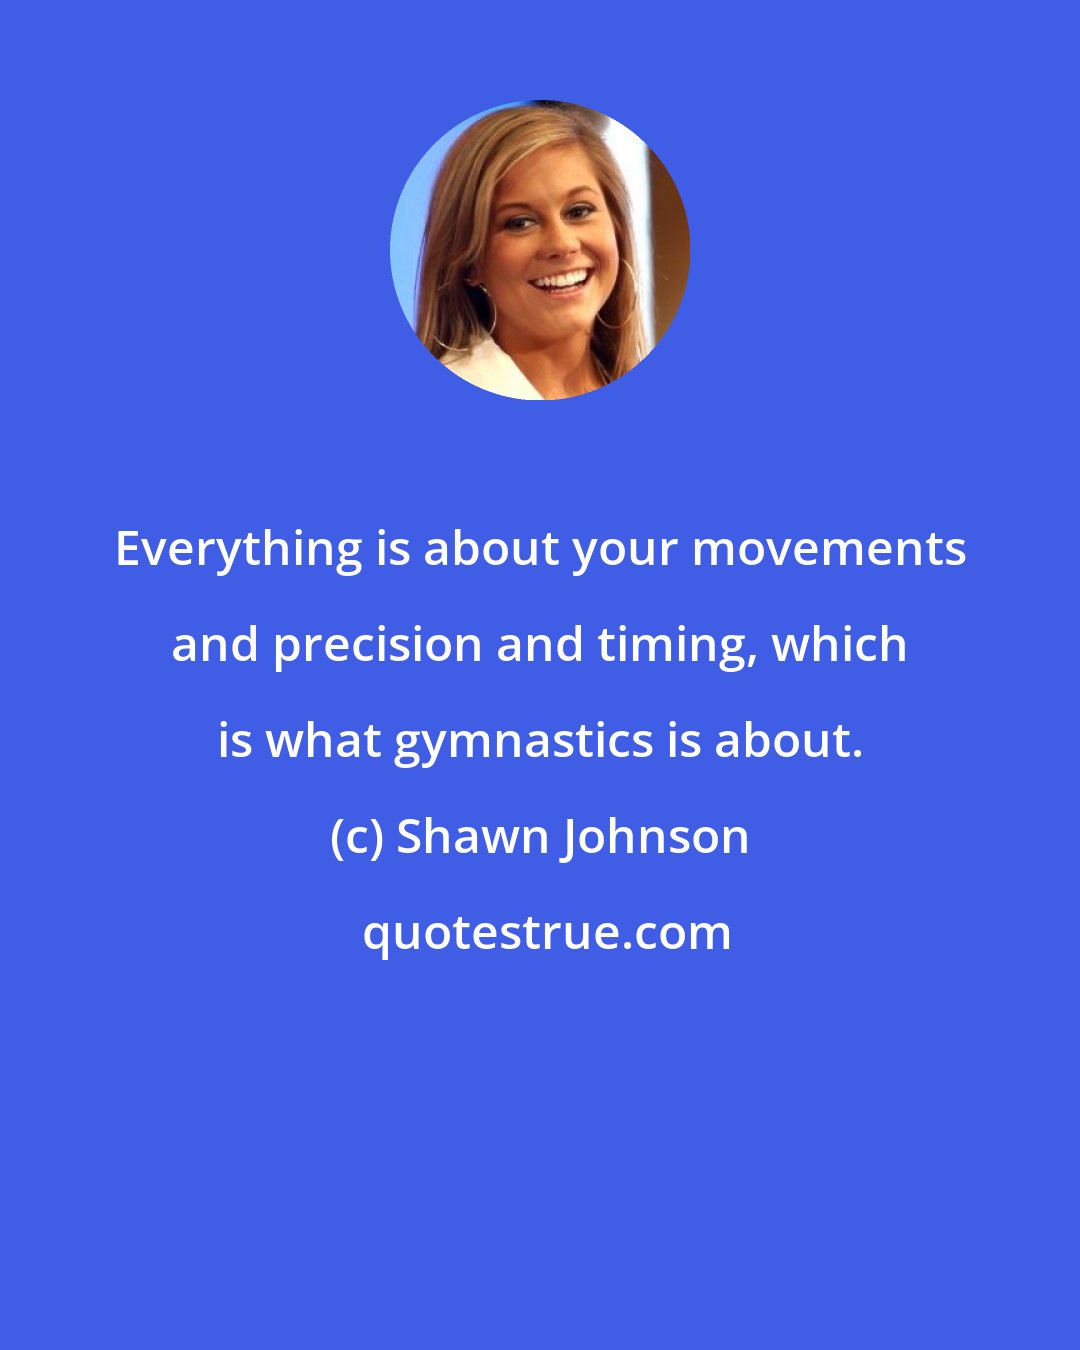 Shawn Johnson: Everything is about your movements and precision and timing, which is what gymnastics is about.